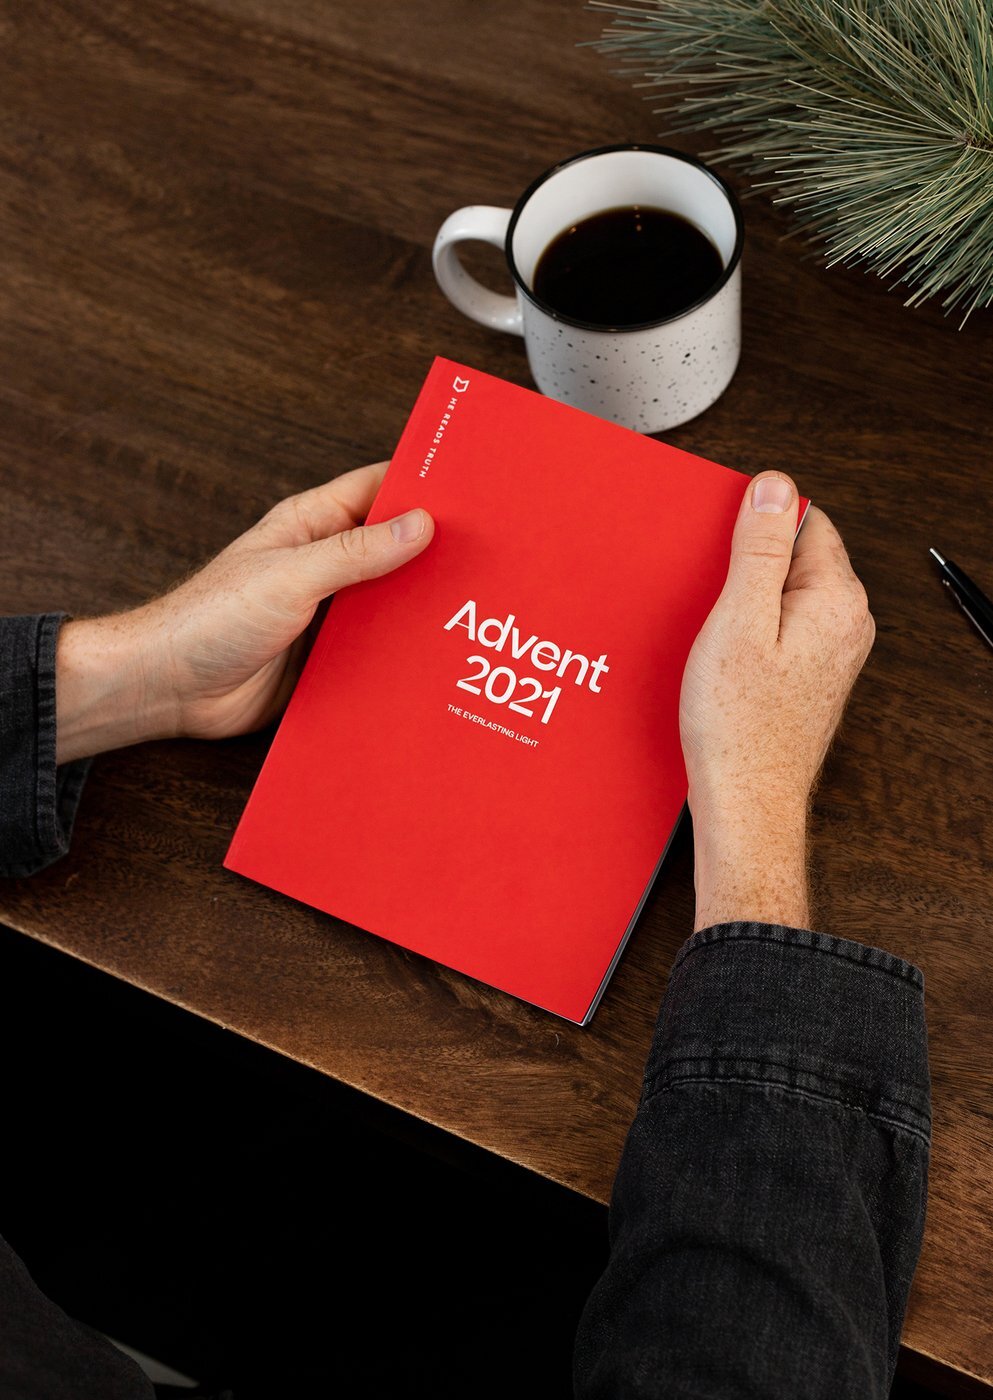 He Reads Truth: Advent 2021 Study Book